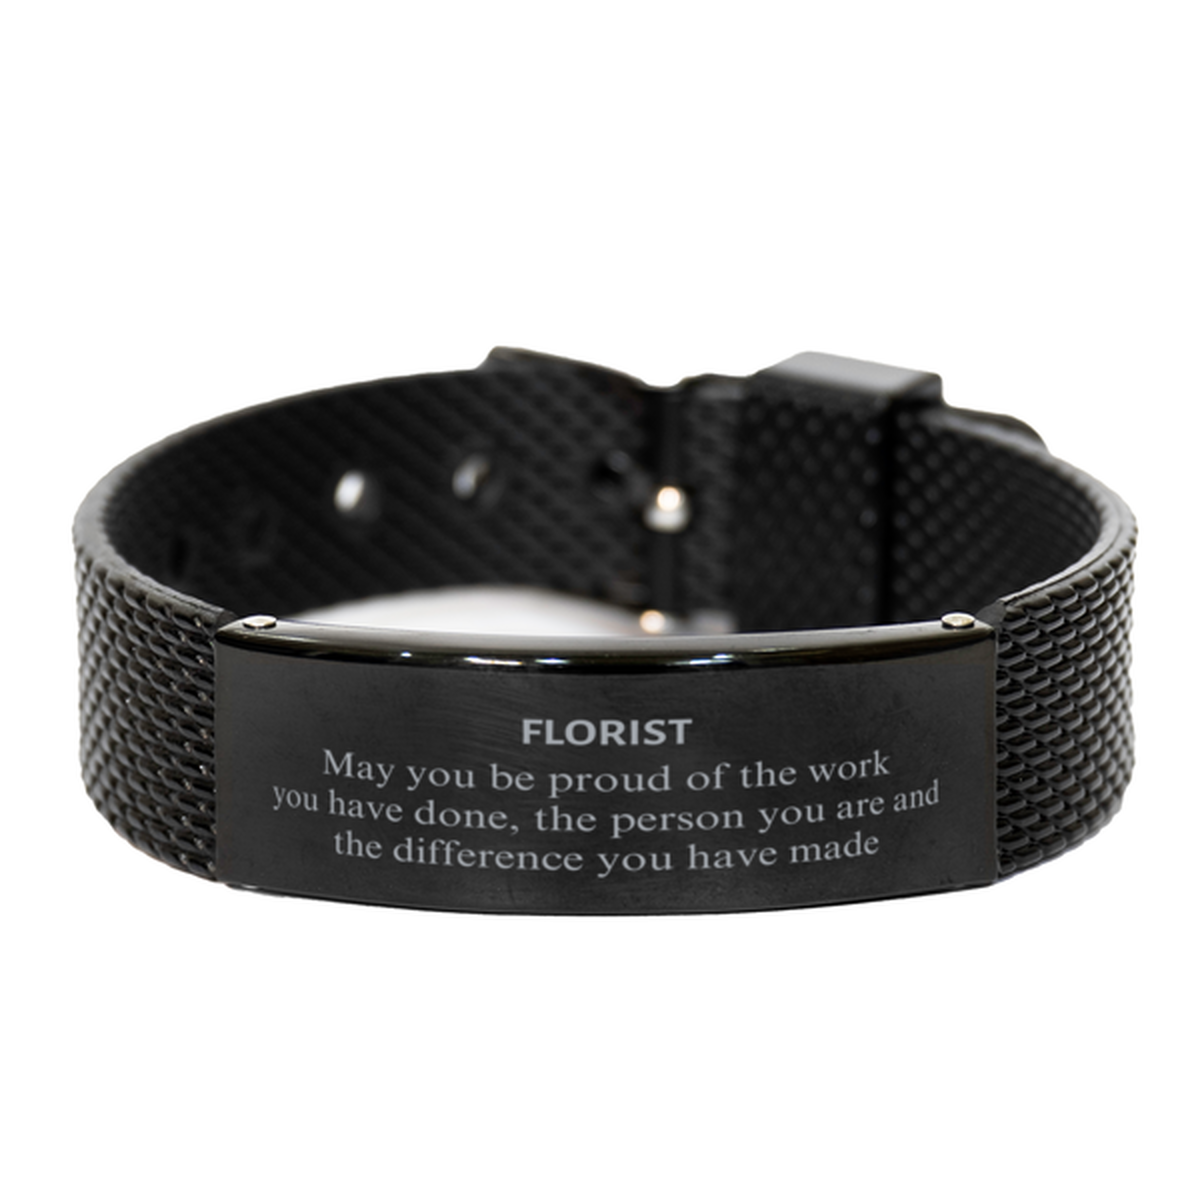 Florist May you be proud of the work you have done, Retirement Florist Black Shark Mesh Bracelet for Colleague Appreciation Gifts Amazing for Florist